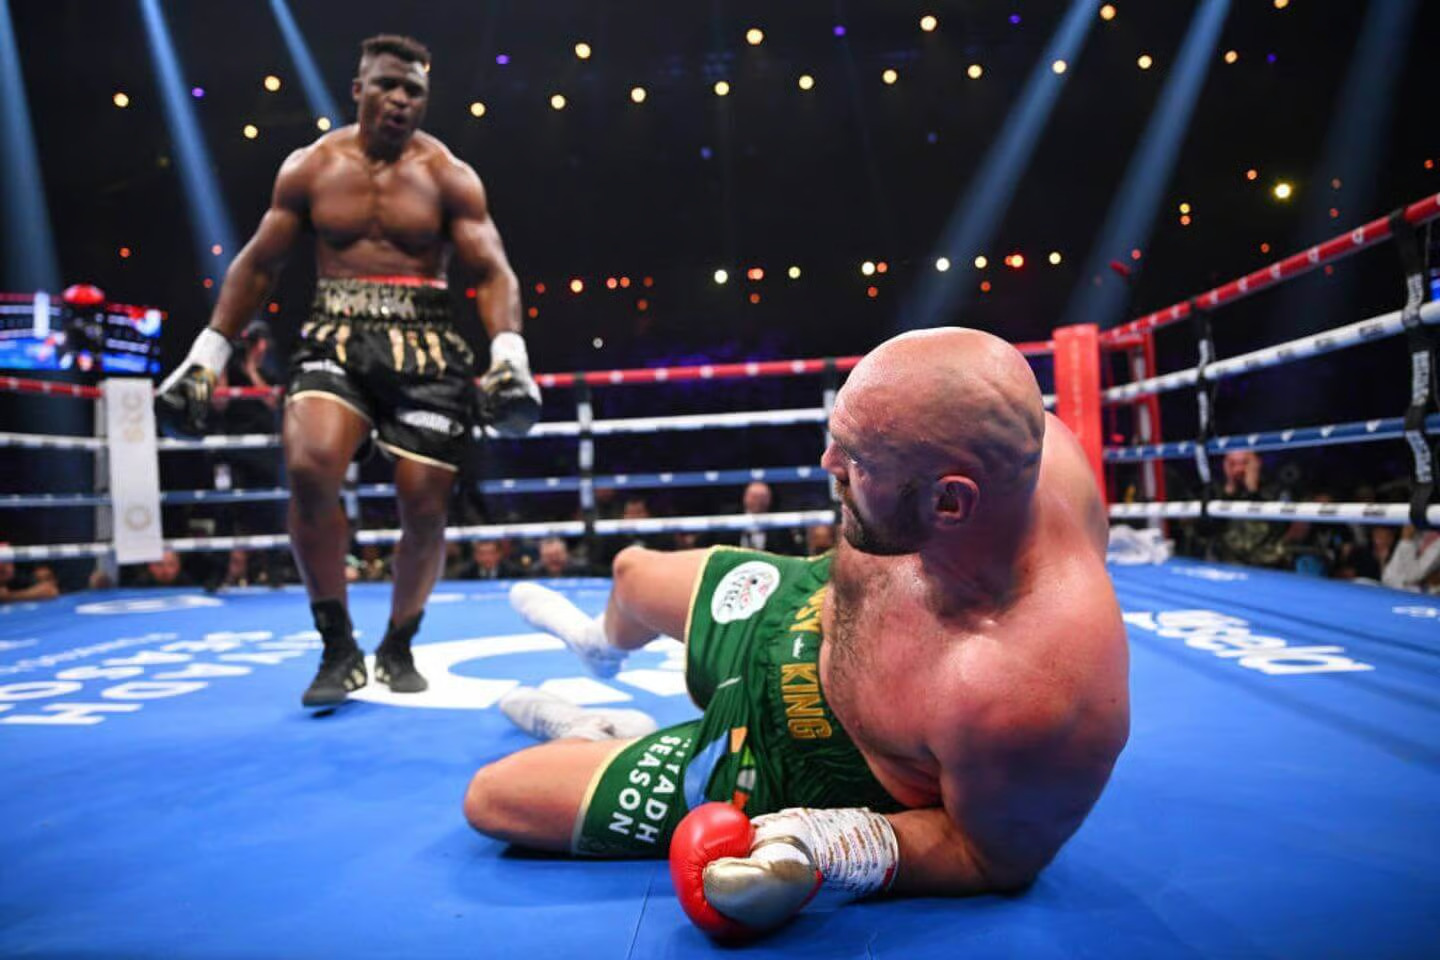 Francis Ngannou standing over Tyson Fury after knocking him down in round 3 of their 10 round fight in Saudi Arabia